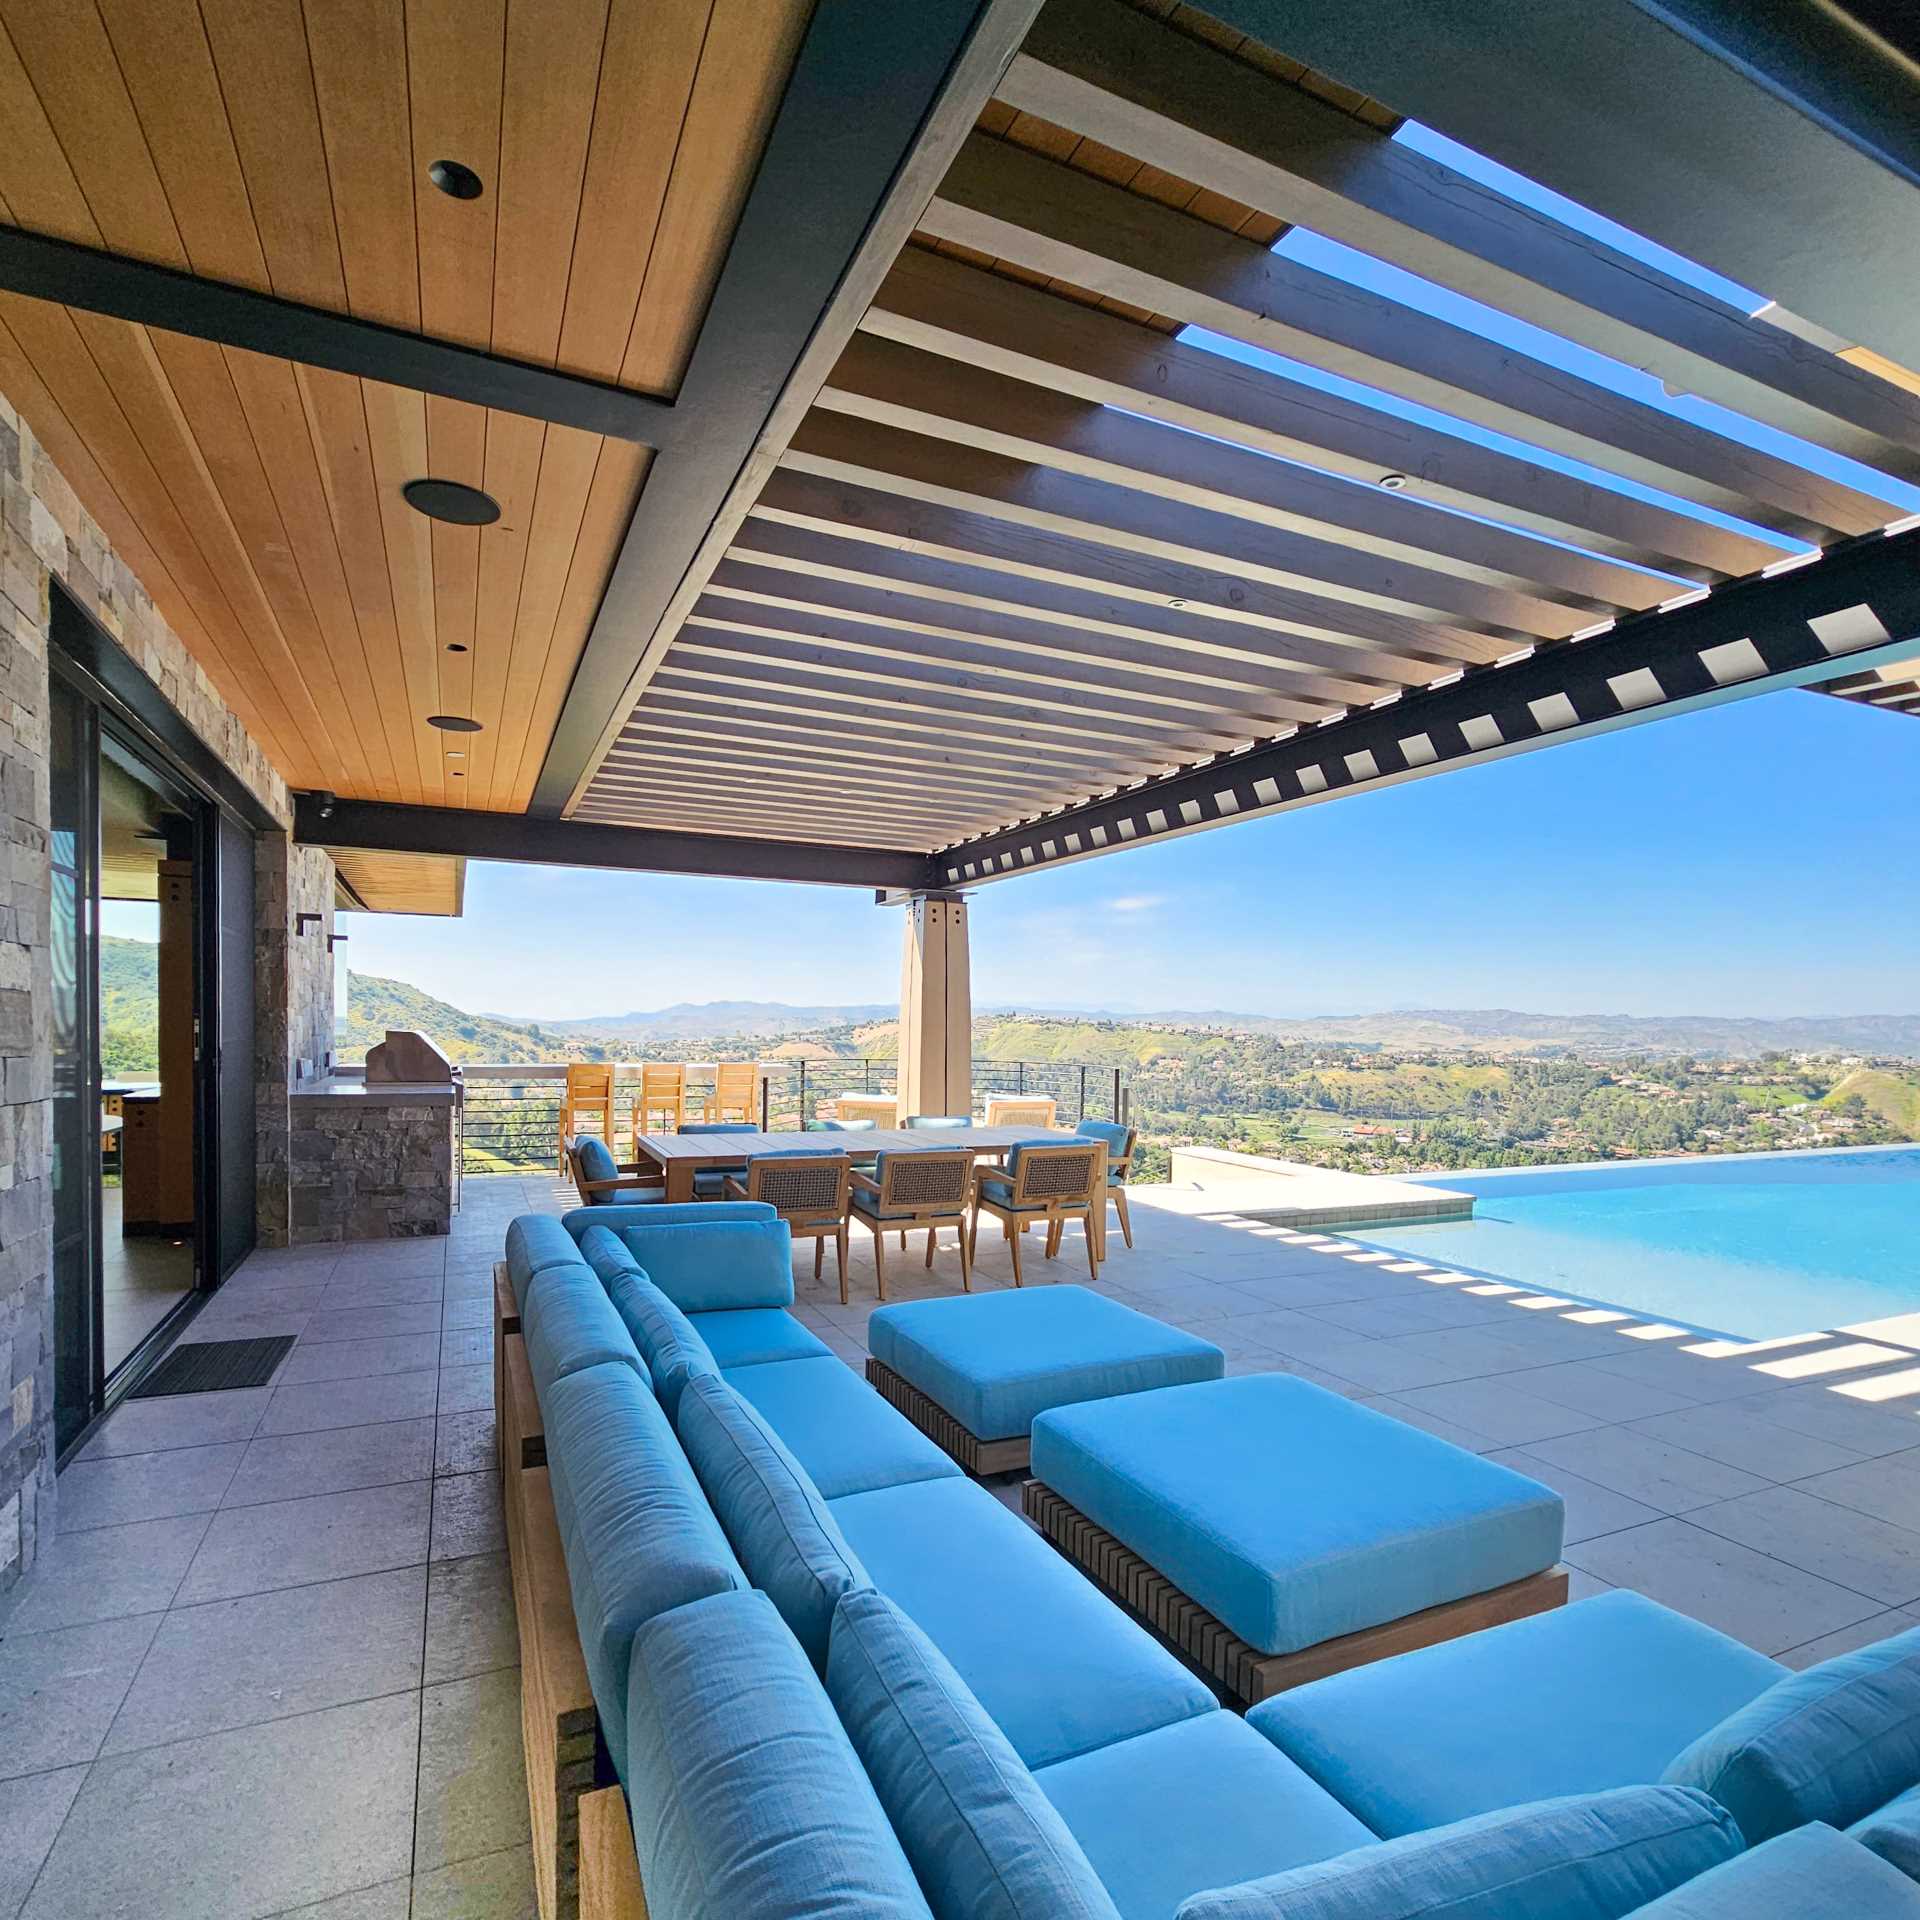 Wood and steel columns are on display by the pool of this contemporary house, while the overhanging roof provides shelter and shade, and a pergola defines an outdoor living space furnished with a couch, dining area, and bbq.